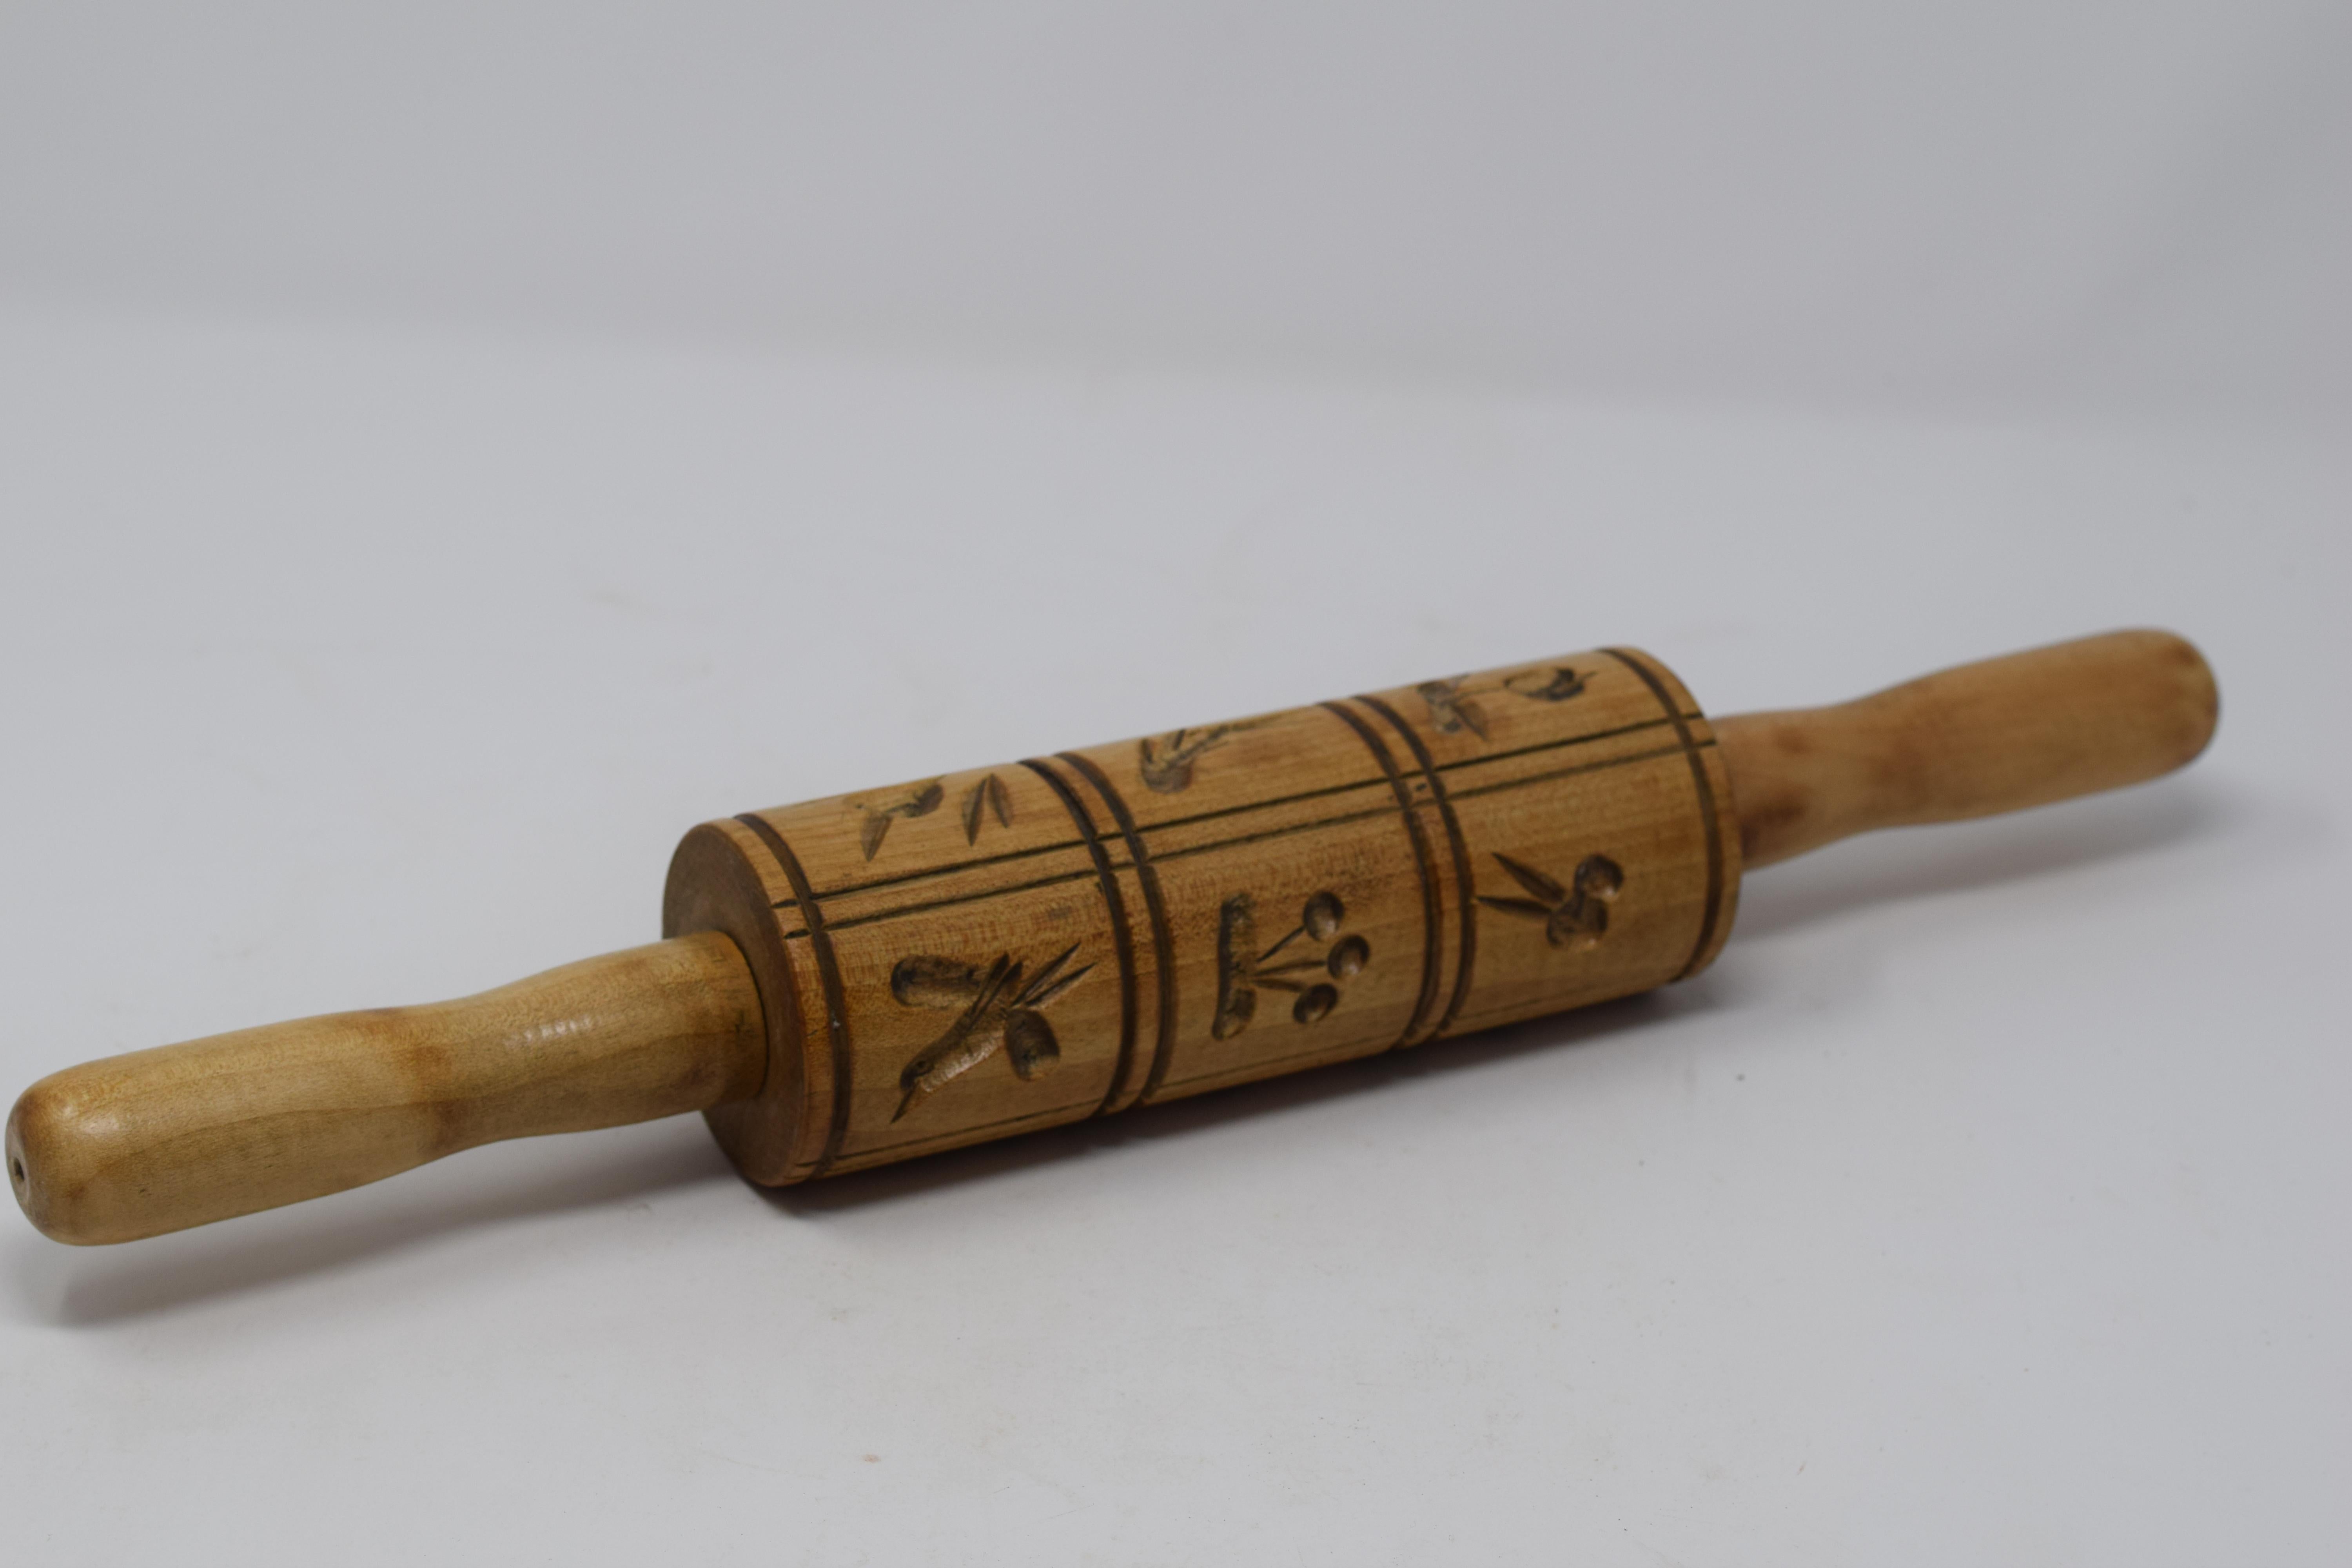 This vintage carved wood rolling pin is used to make Springerle, a type of German biscuit with an embossed design made by pressing a mold onto rolled dough and allowing the impression to dry before baking. The decorative pin features a collection of